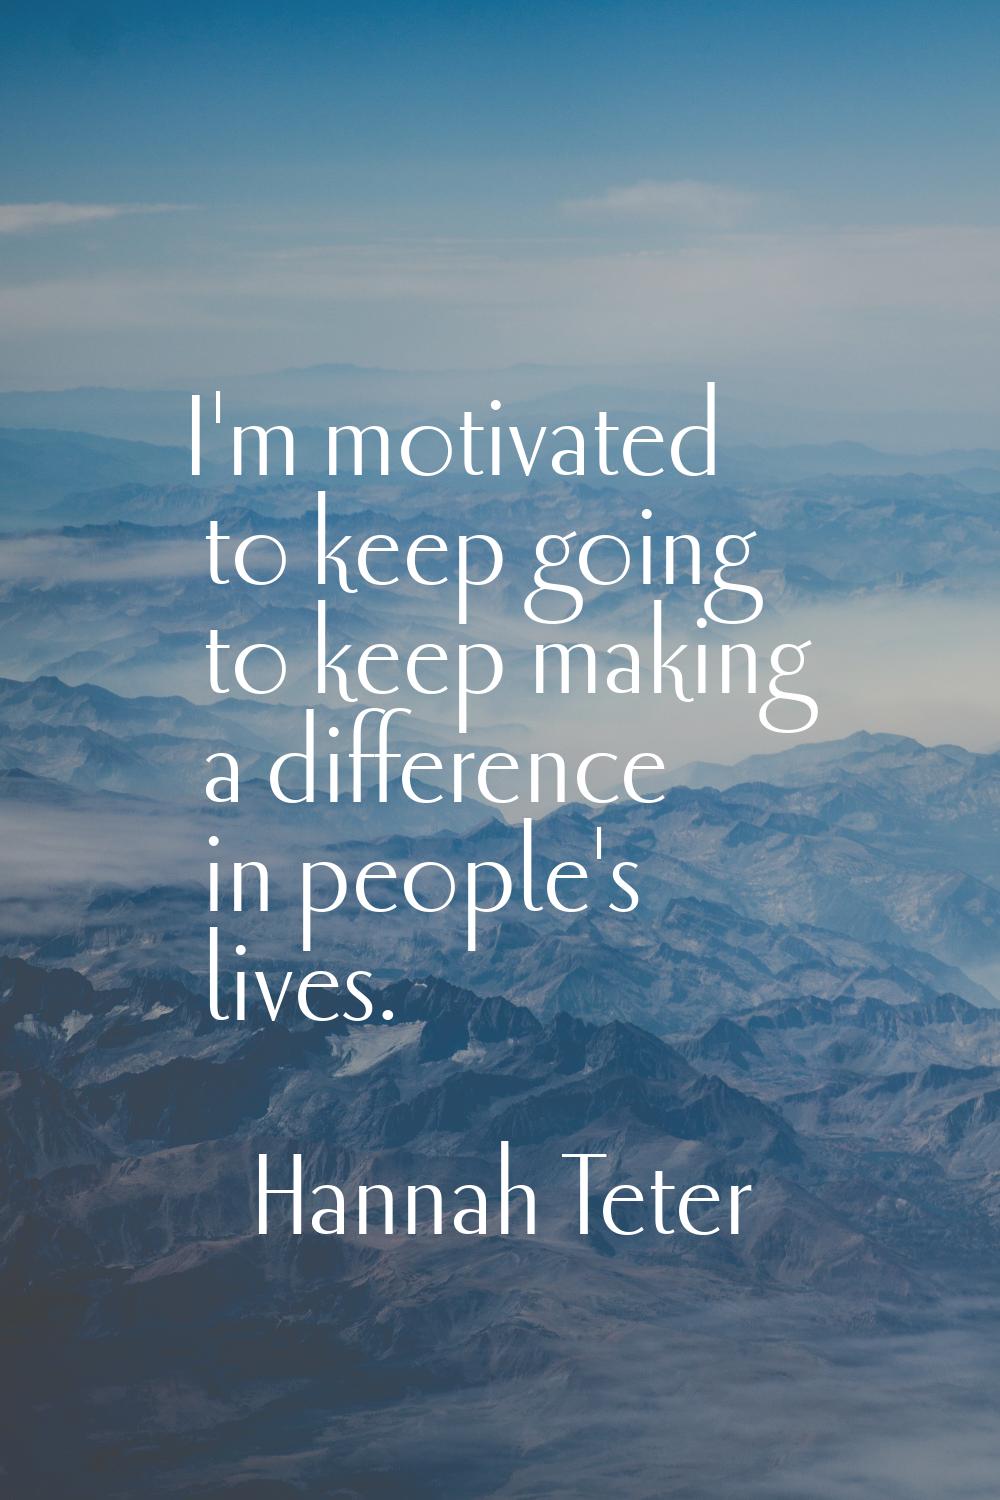 I'm motivated to keep going to keep making a difference in people's lives.